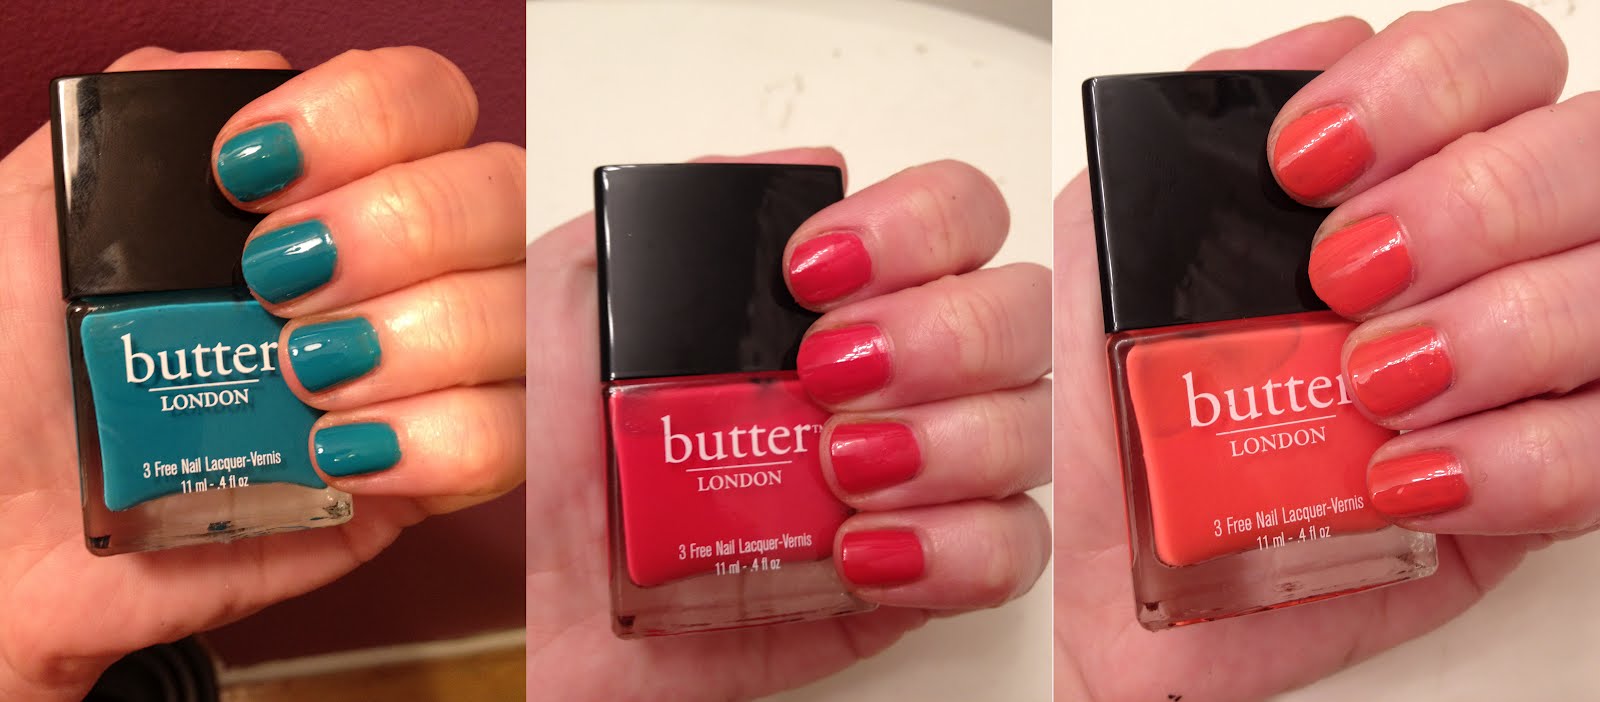 Butter London Nail Lacquer in "Garnet" - wide 4